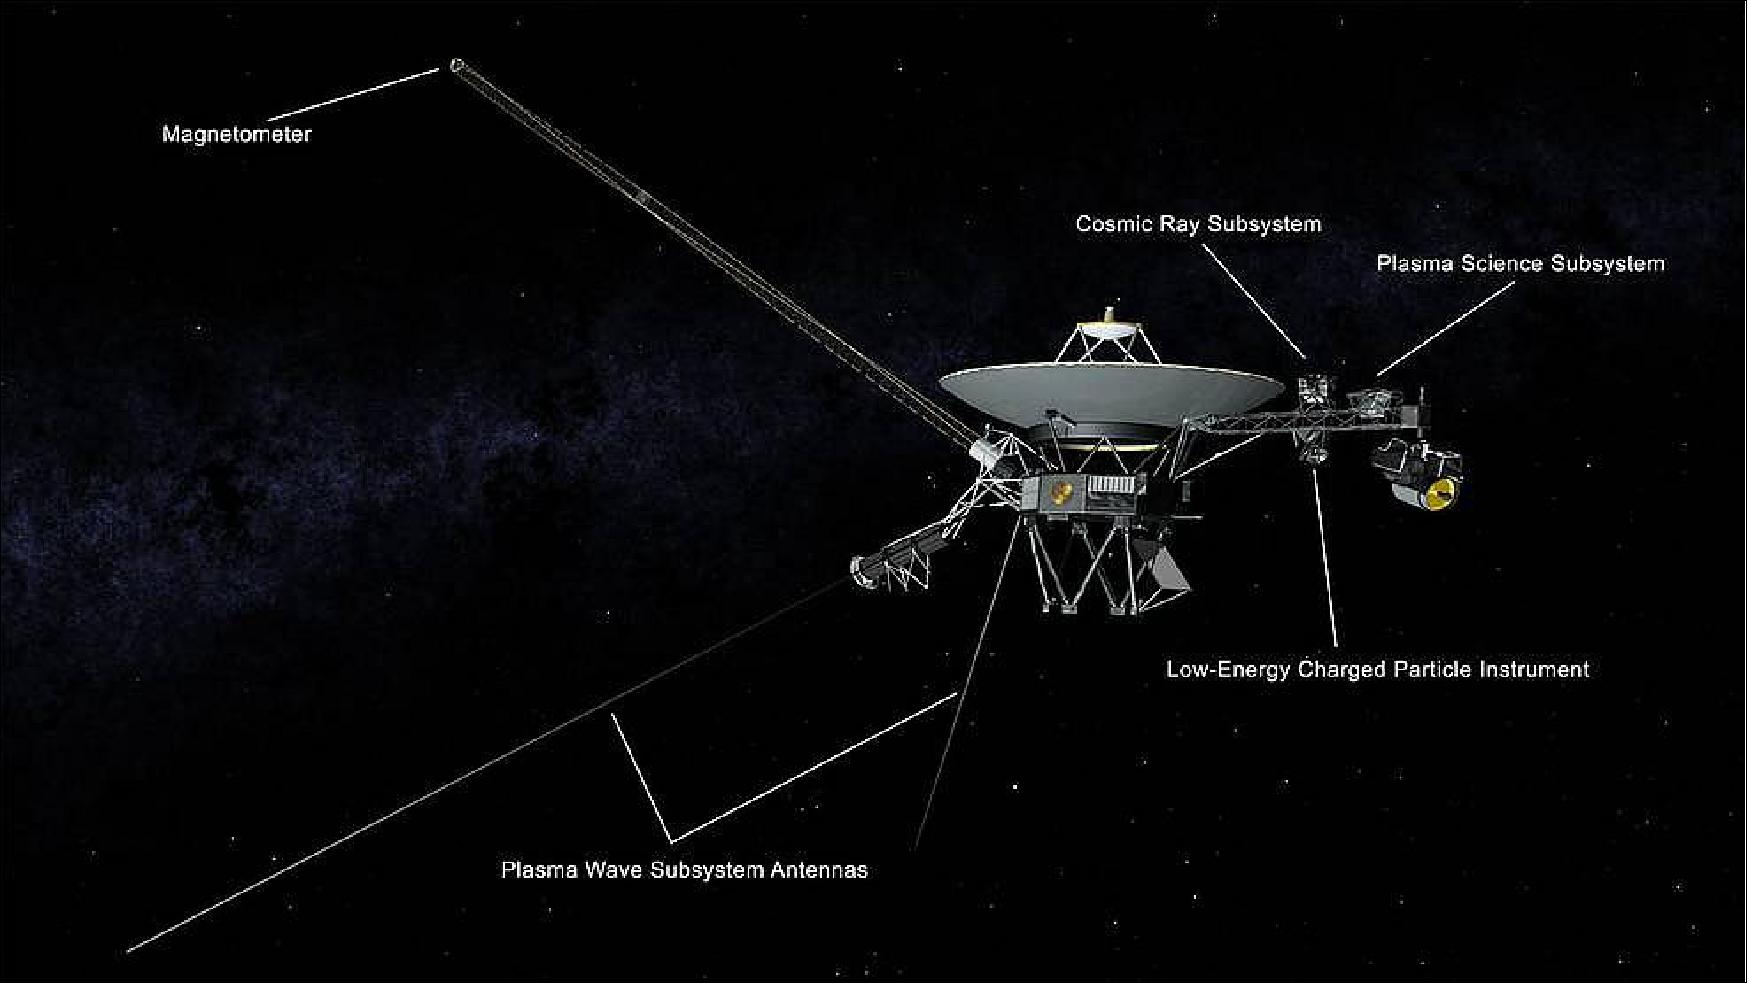 Figure 2: Illustration of NASA's Voyager spacecraft showing the antennas used by the Plasma Wave Subsystem and other instruments (image credit: NASA/JPL-Caltech)